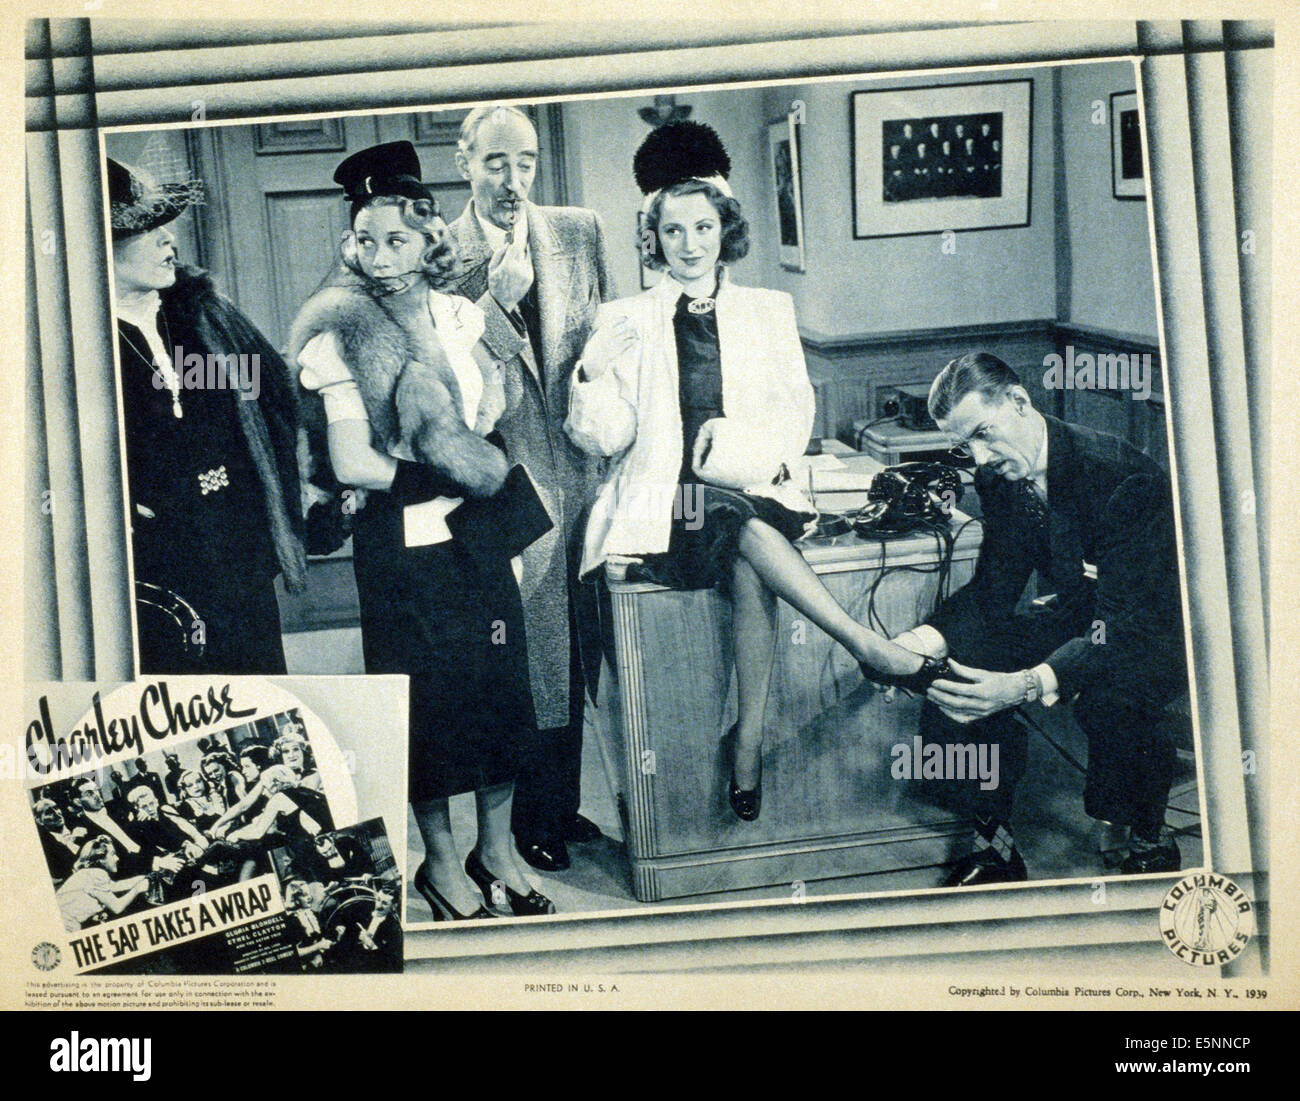 THE SAP TAKES A WRAP, US lobbycard, standing from left: Ethel Clayton, Gloria Blondell, Harry Wilson, Charley Chase (right), Stock Photo